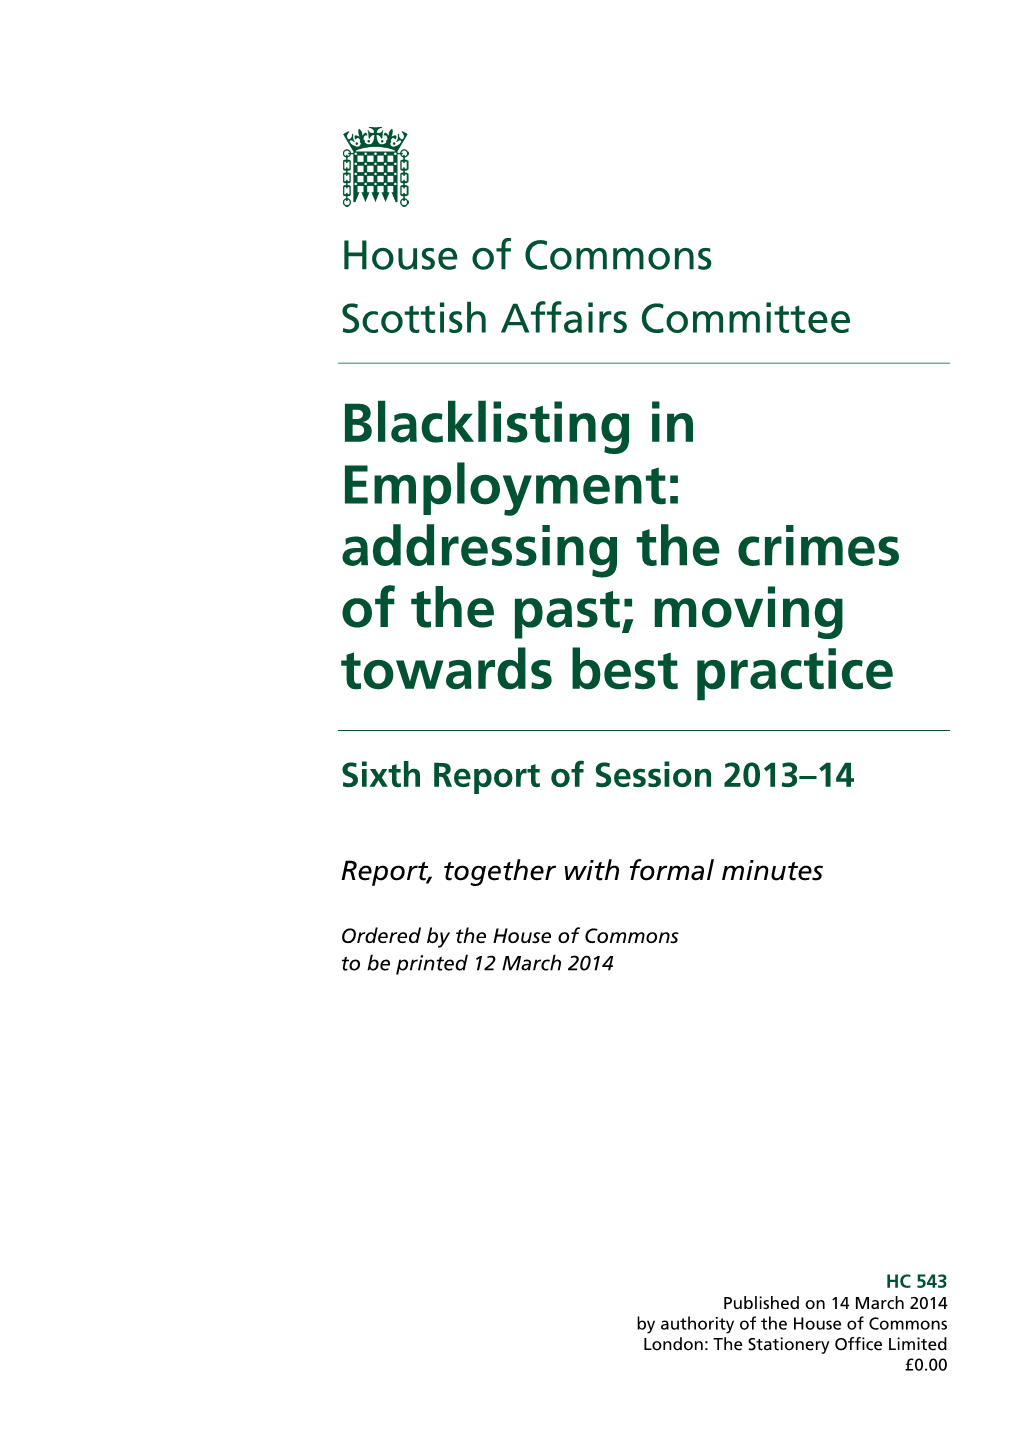 Report: Blacklisting in Employment: Addressing the Crimes of the Past